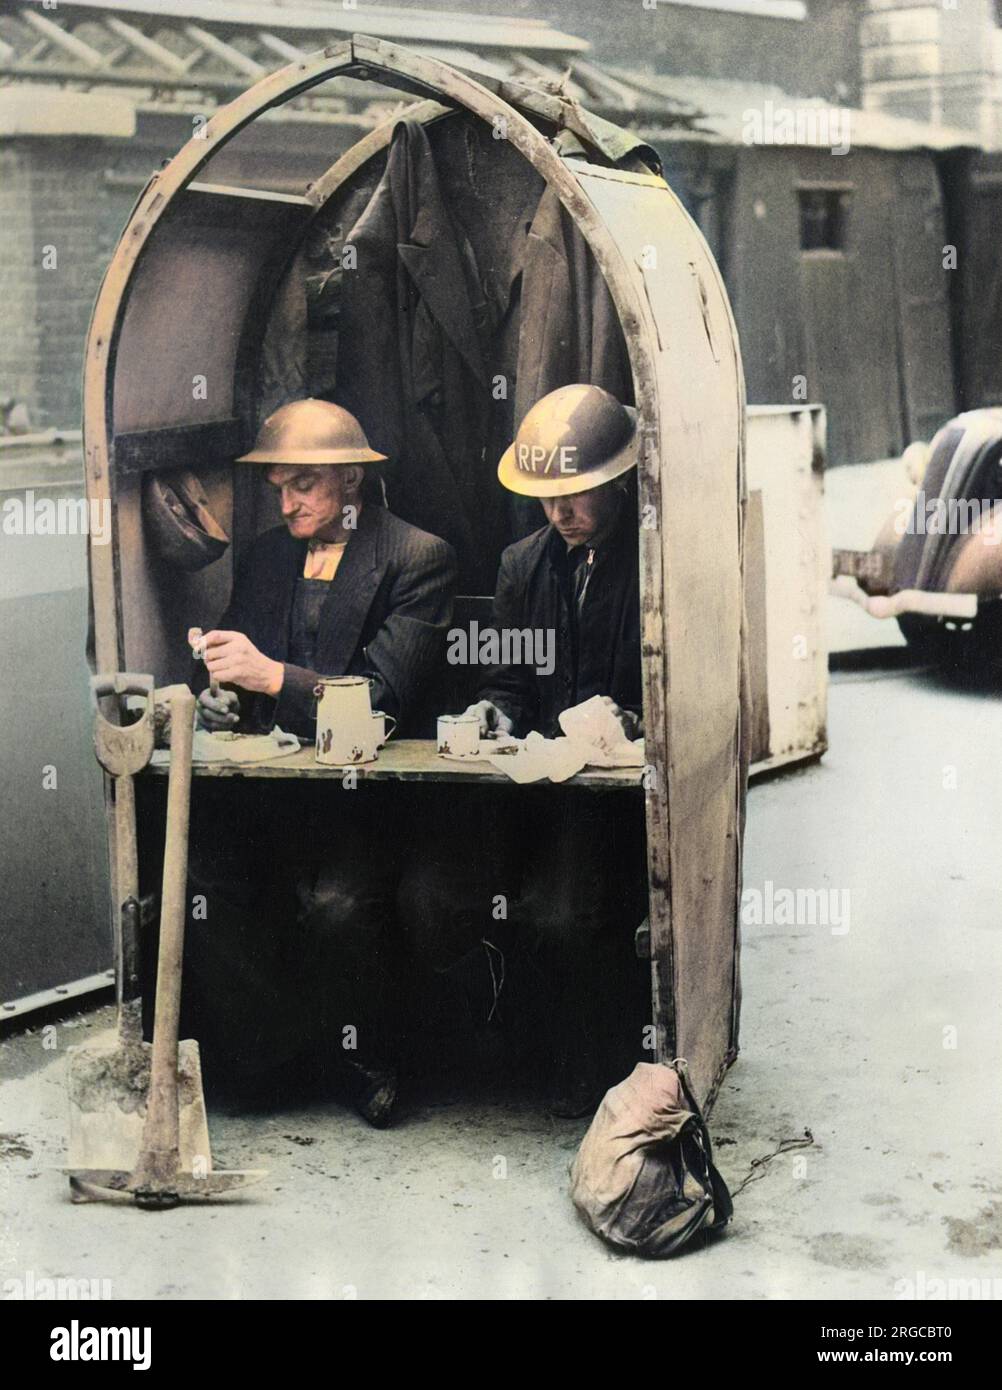 Keep Calm and Carry On. A quite fantastic photograph showing two workmen engaged in repairing air raid damage in the London area continue with their 'private' luncheon although the sirens have sounded another 'alert' - October, 1940. Stock Photo